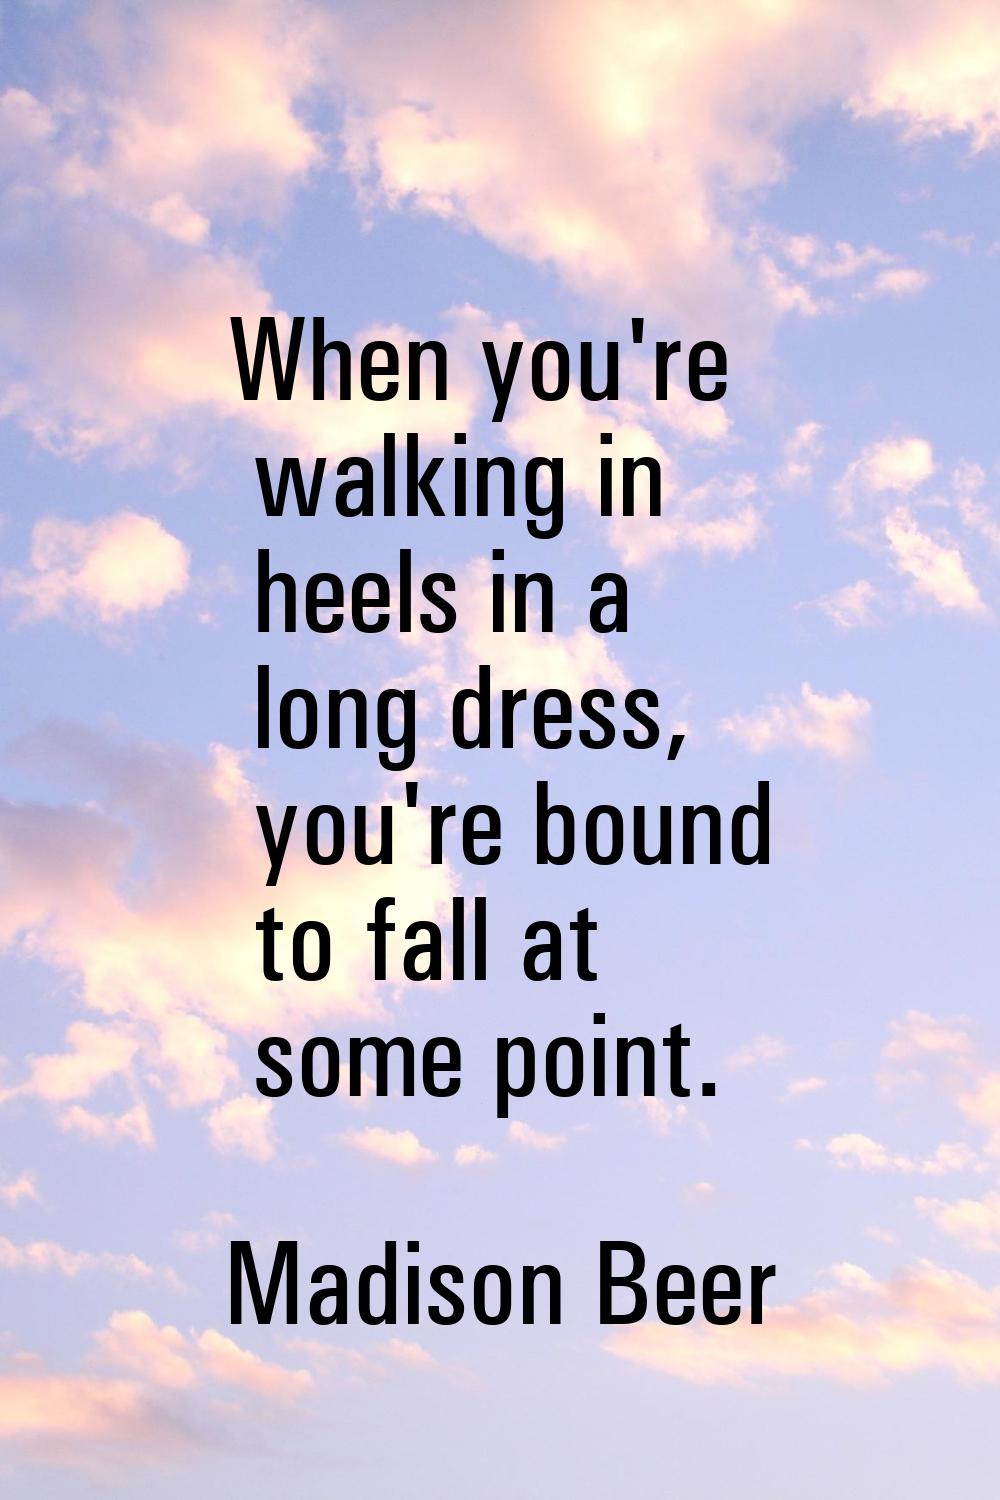 When you're walking in heels in a long dress, you're bound to fall at some point.